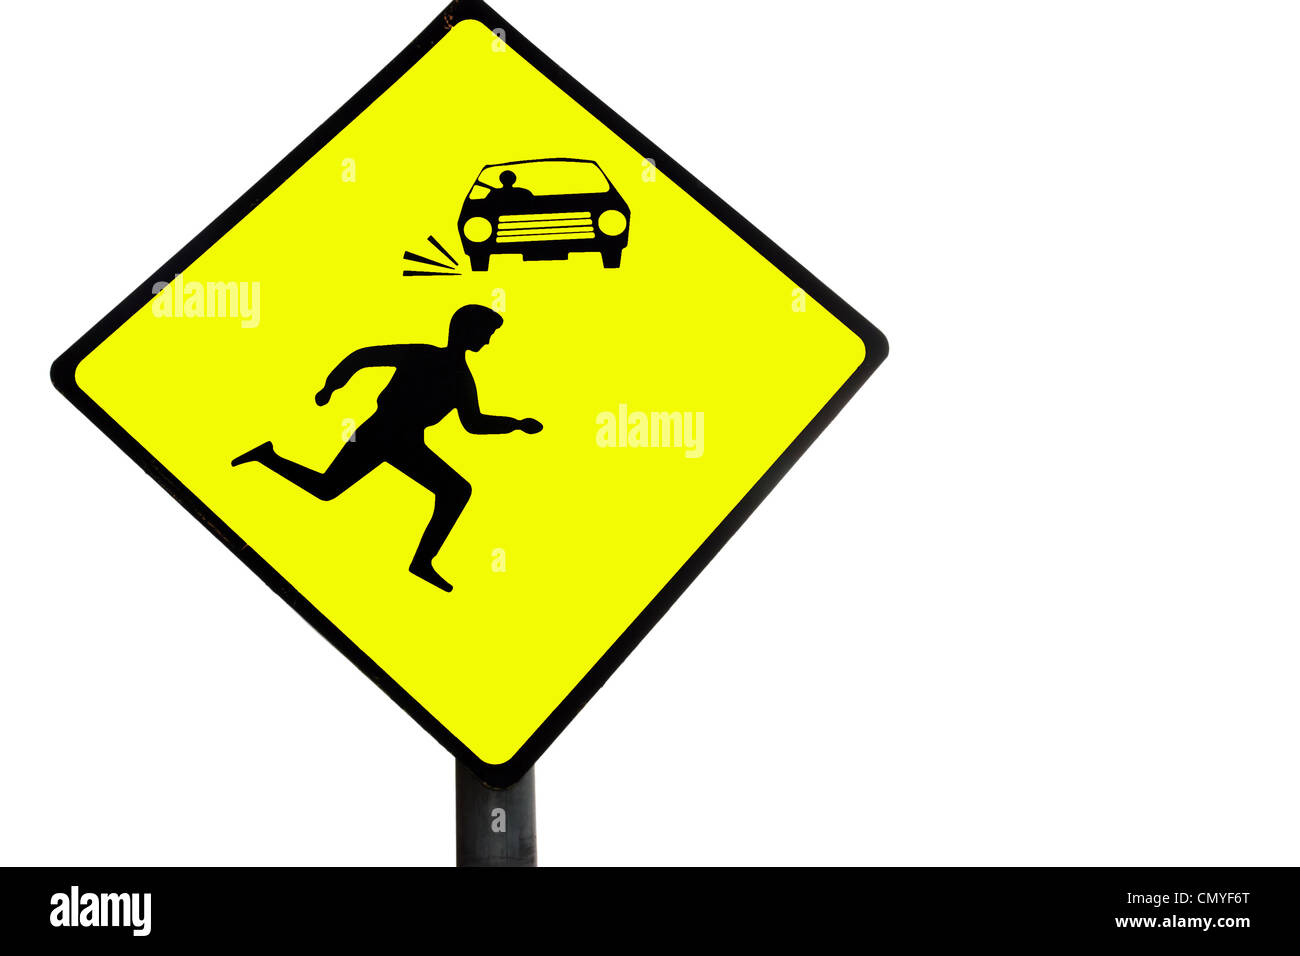 a warning sign about cars and pedestrians against a white background Stock Photo